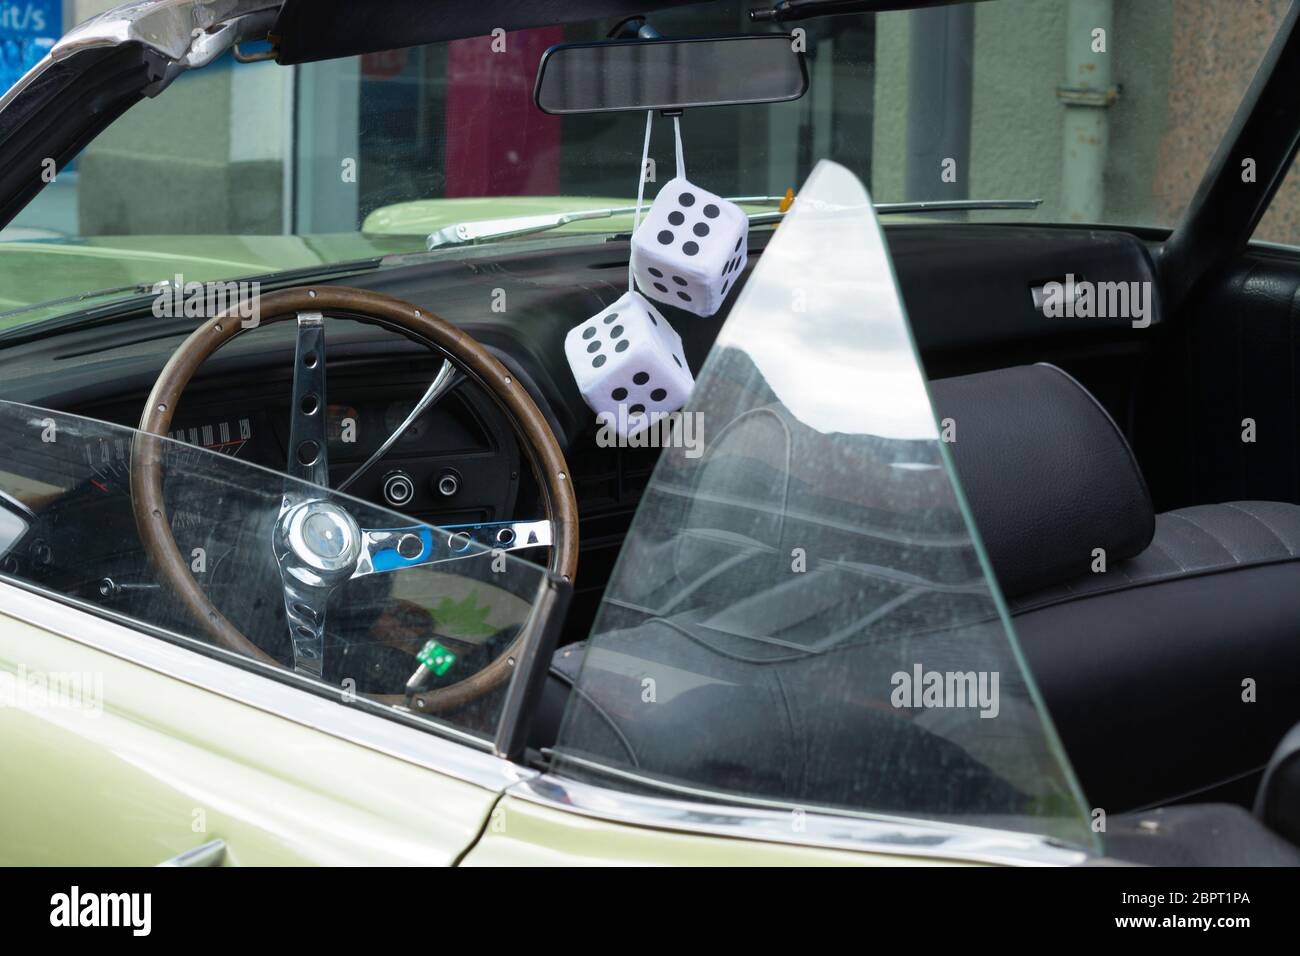 Fuzzy dice hang from the rear-view mirror of a vintage 'low rider